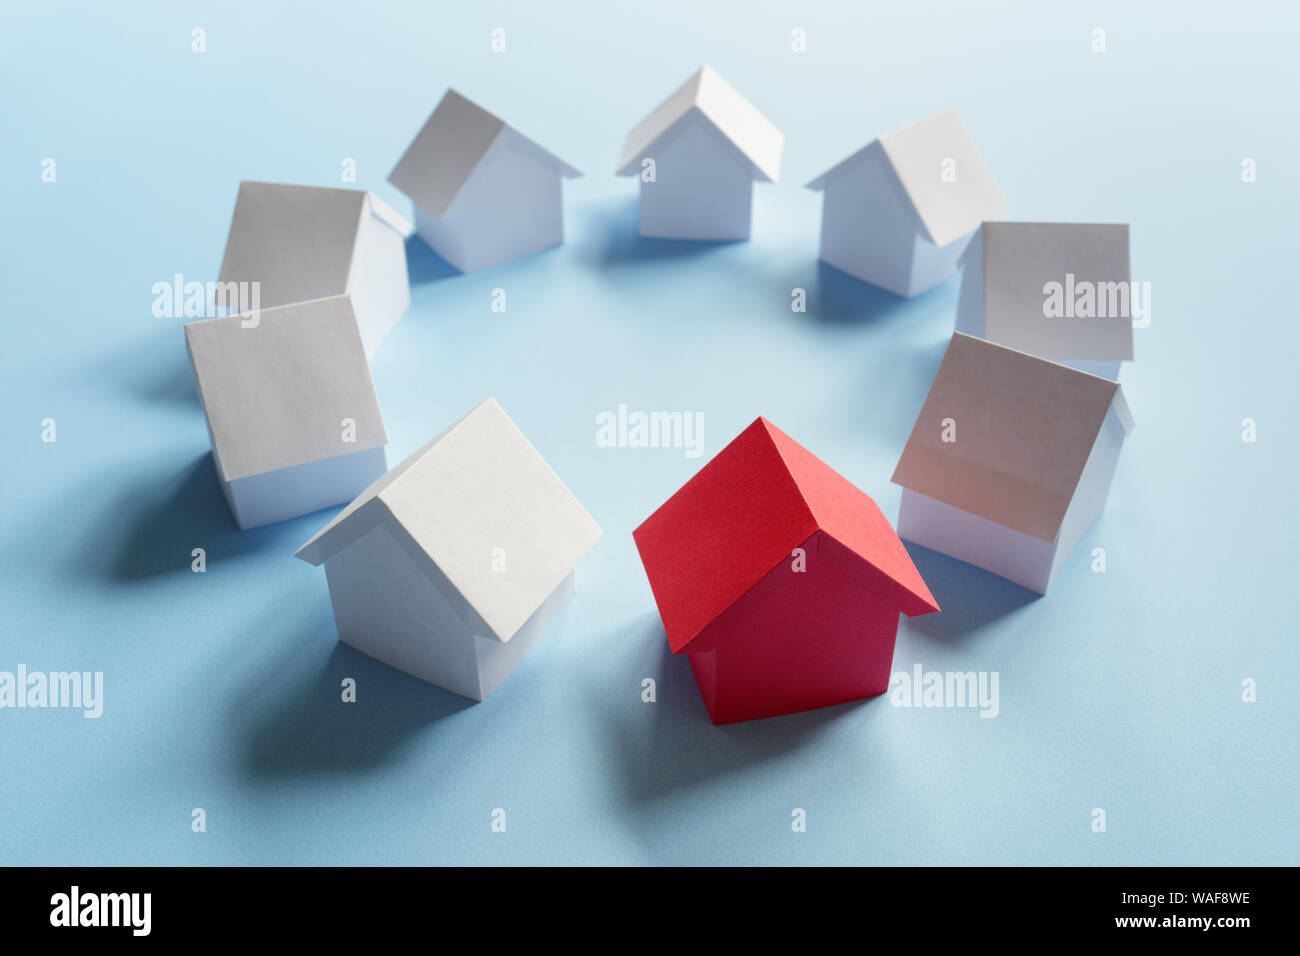 Searching for real estate property, house or new home, red house standing out Stock Photo